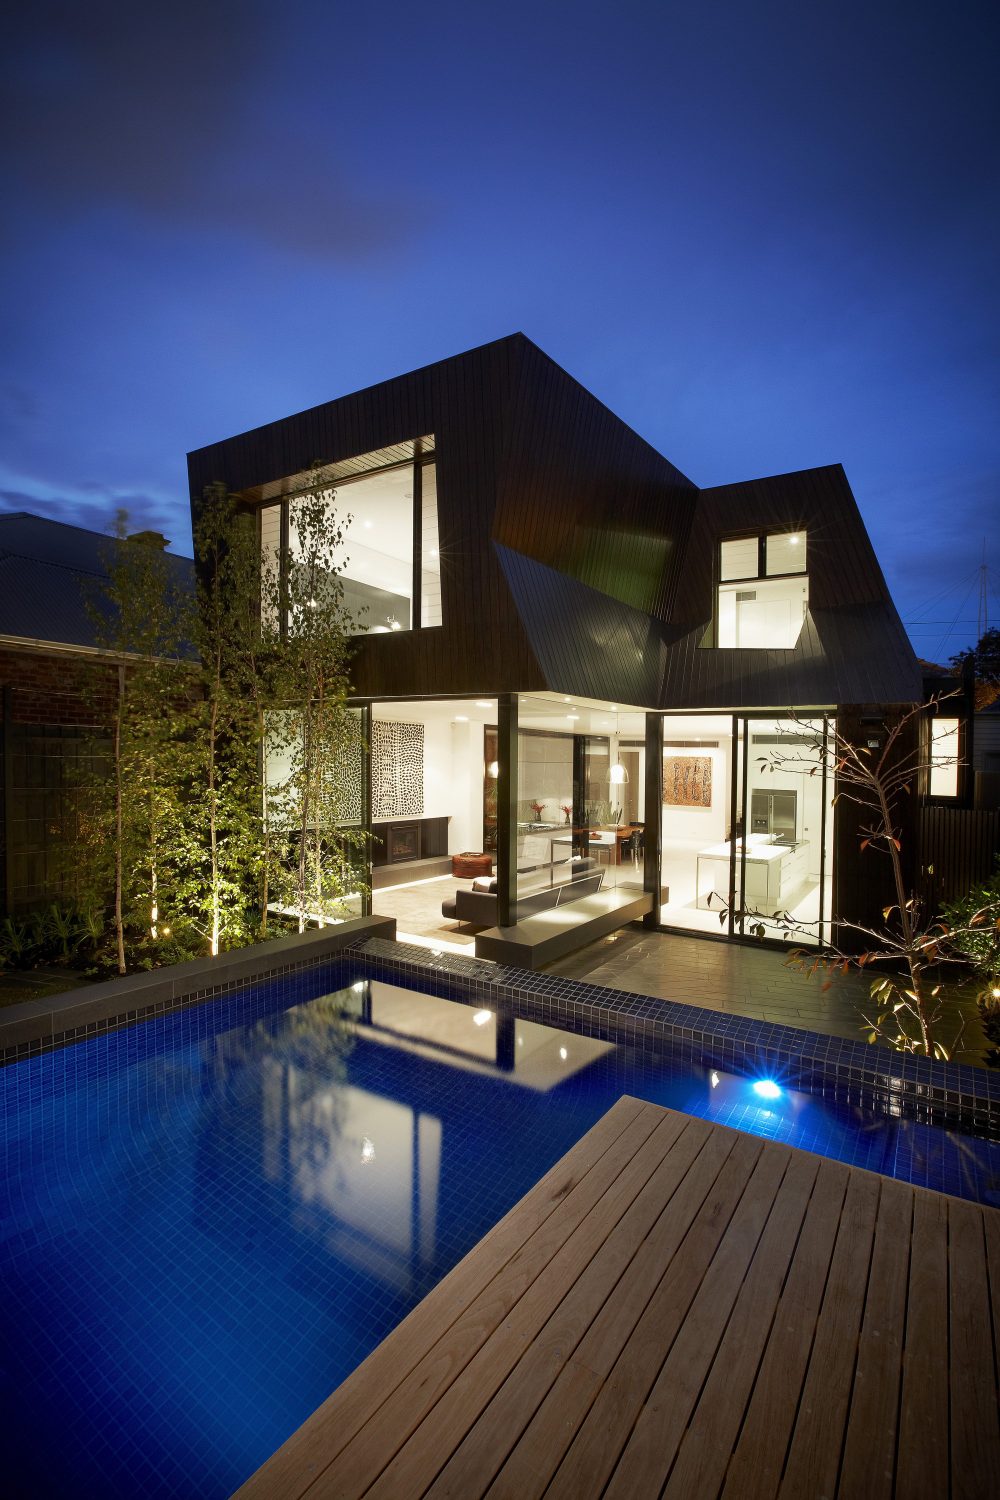 Enclave House by BKK Architects